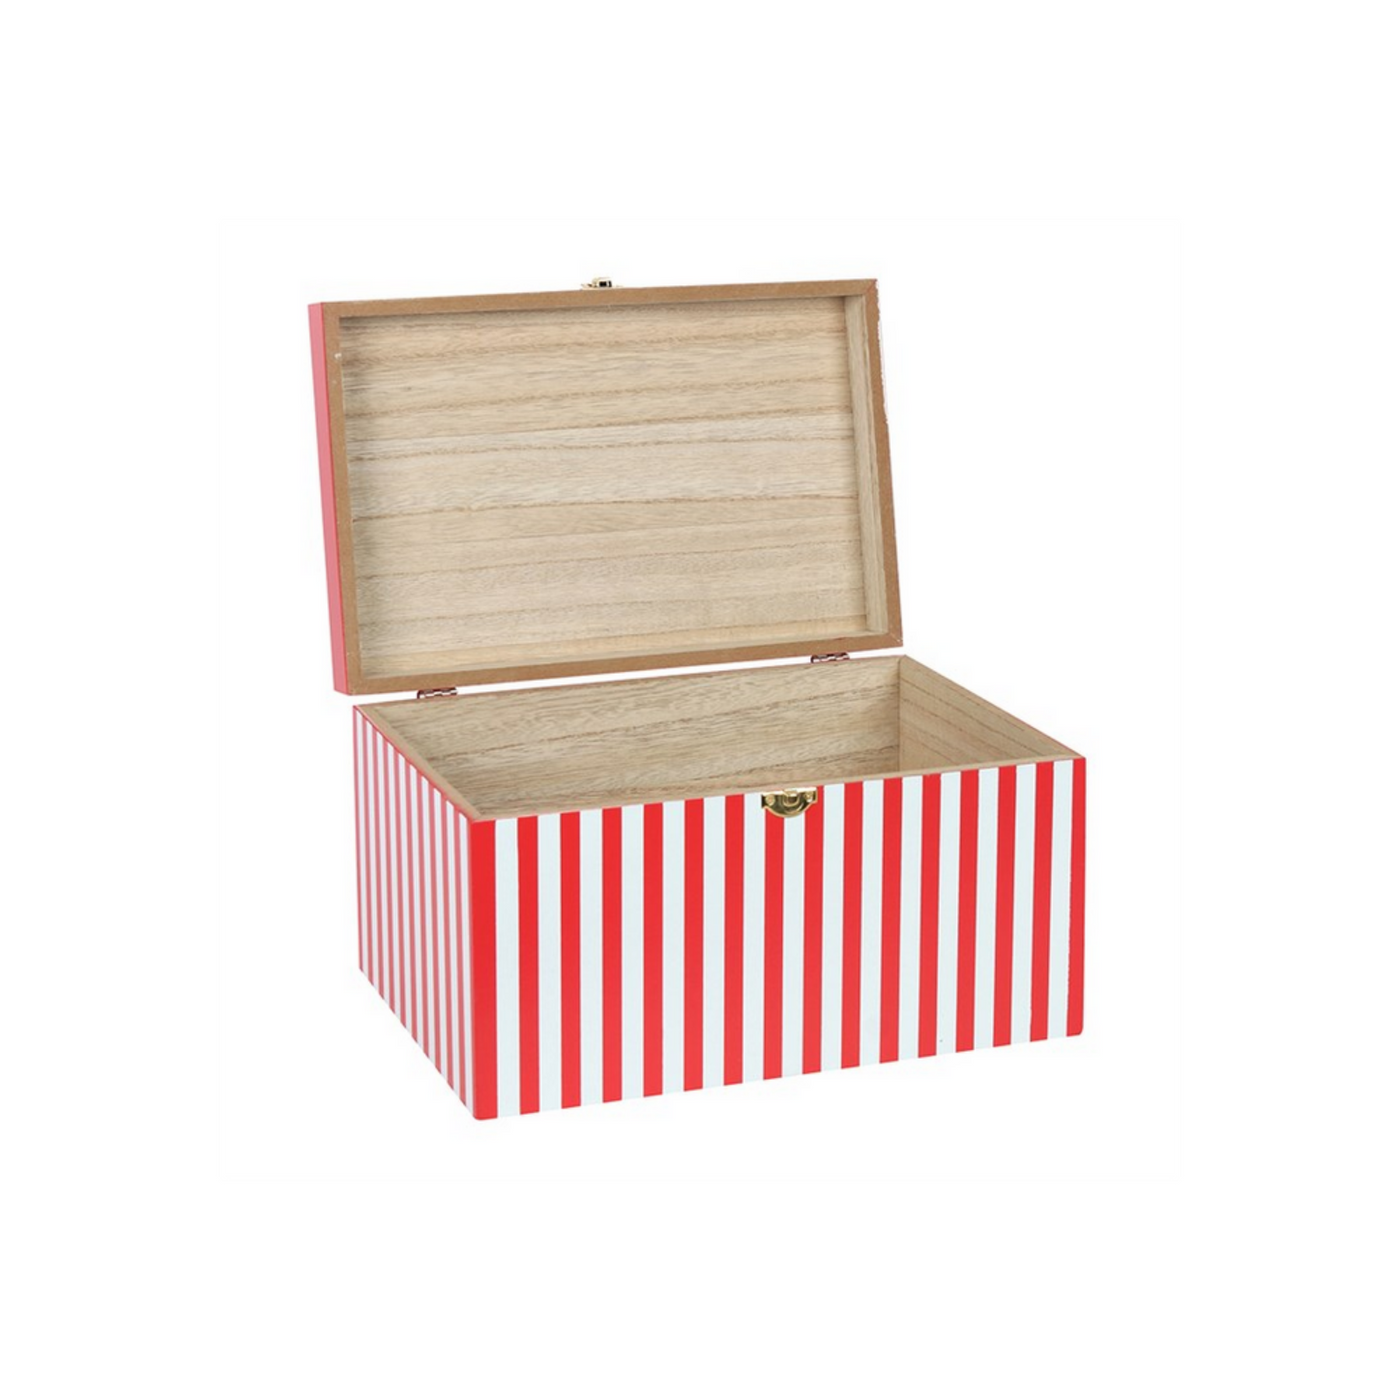 Gingerbread Red Christmas Eve Storage Box With Lid.